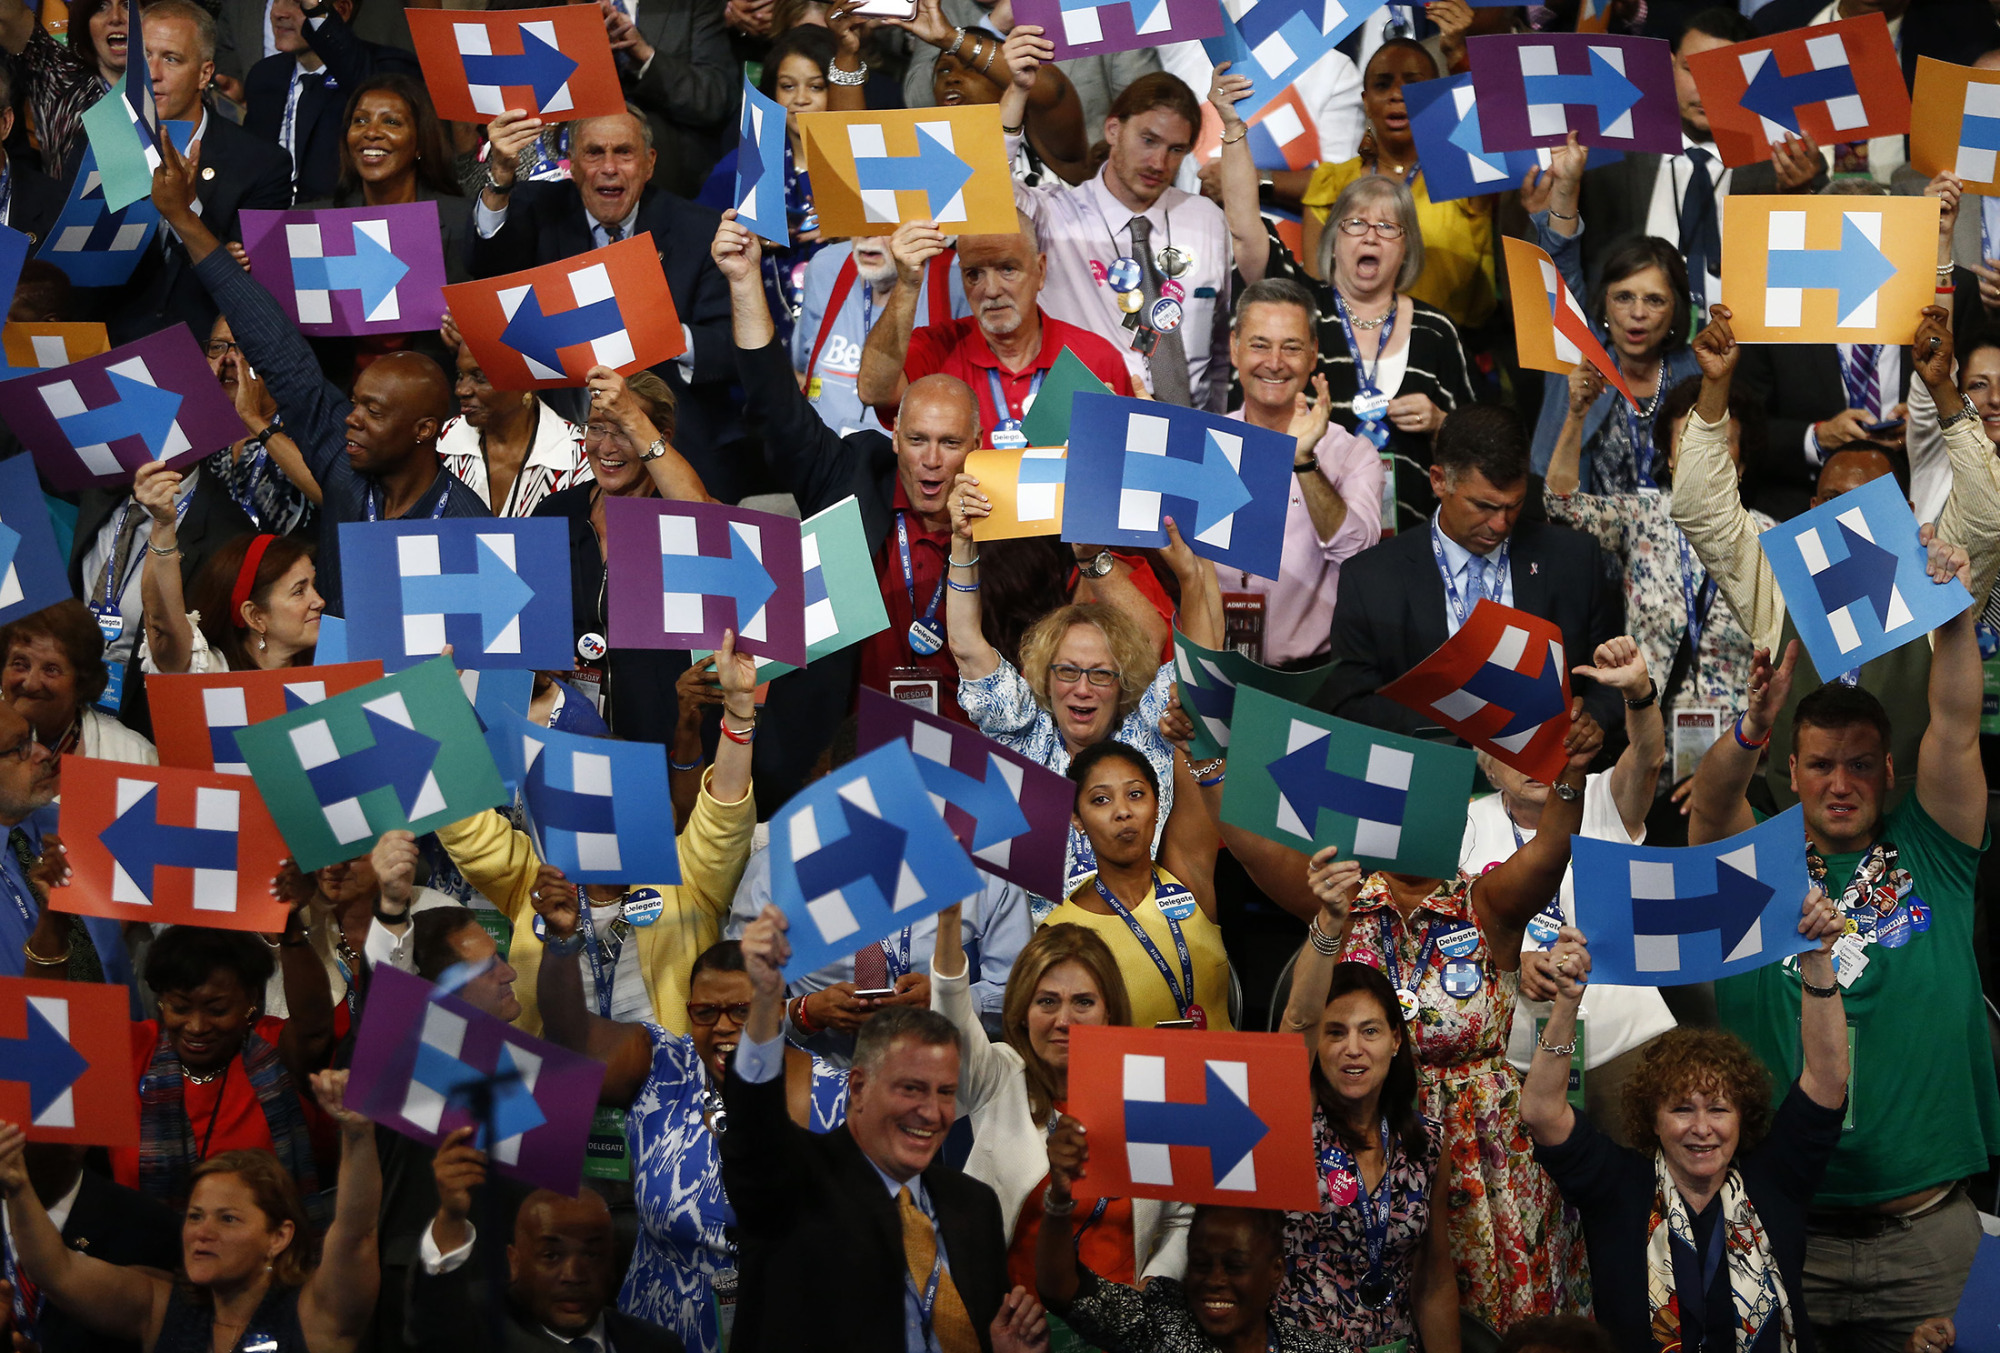 The 2016 Democratic National Convention in Pictures Bloomberg